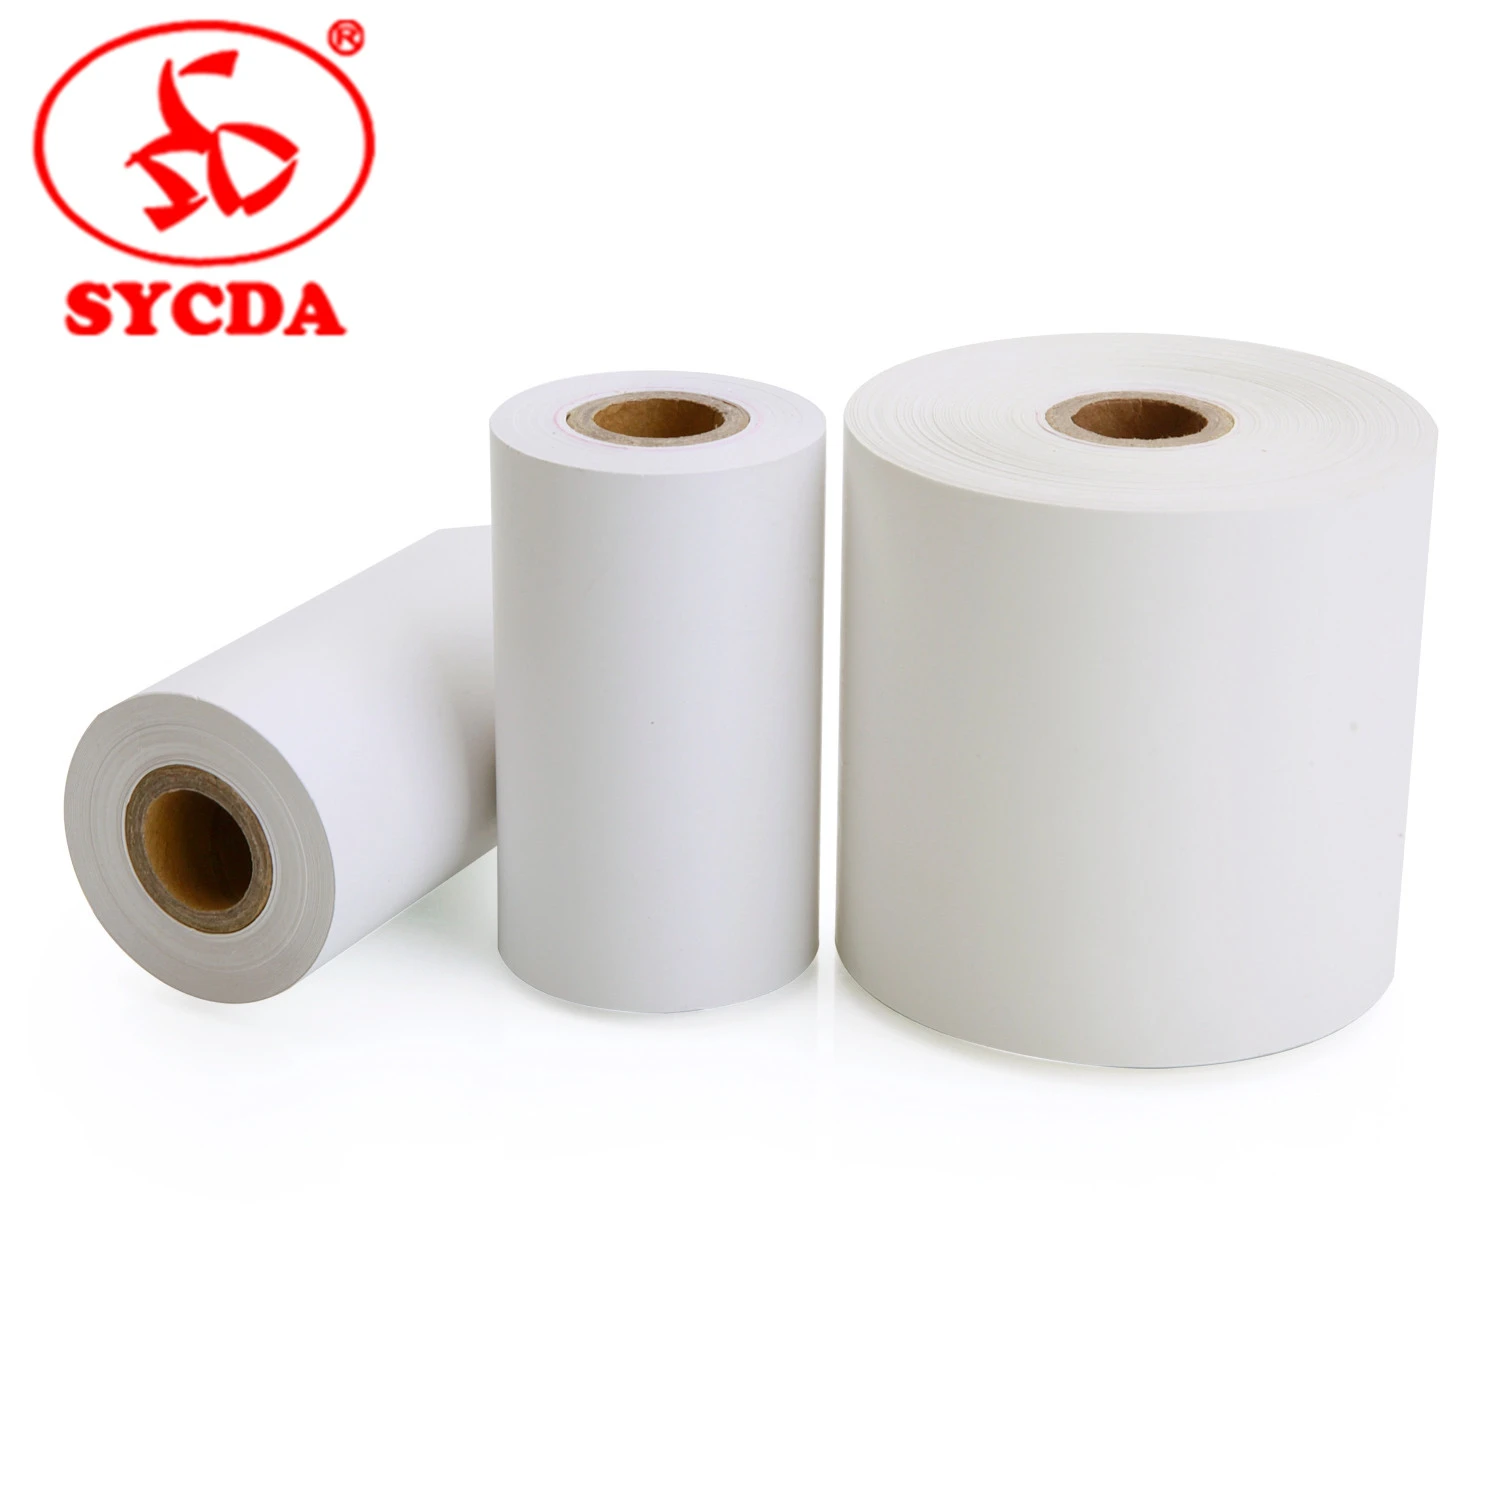 Hot Sale 55g 80mm*80mm ATM FAX Printing PDQ Thermal Paper Roll